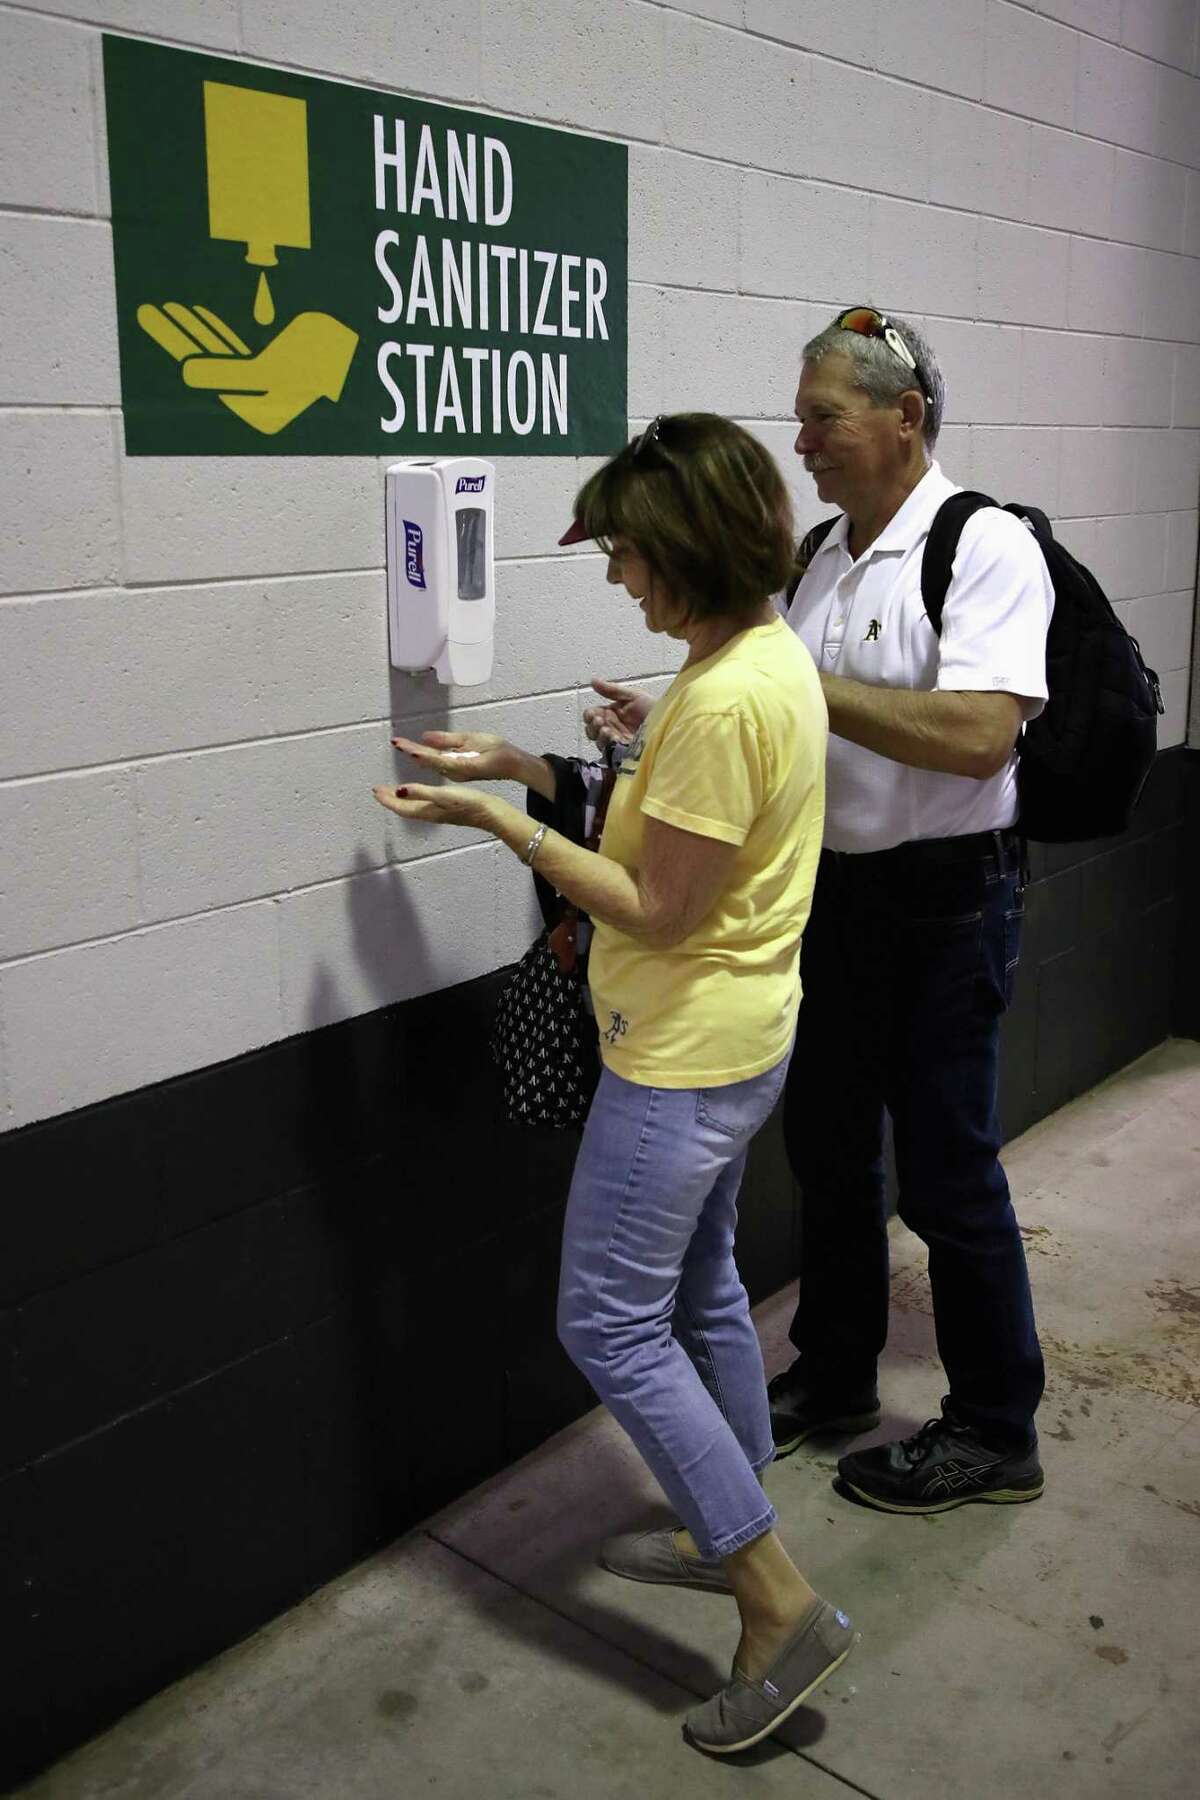 MESA, ARIZONA - MARCH 10: Fans use hand sanitizer stations along the concourse before the MLB spring training game between the Kansas City Royals and the Oakland Athletics at HoHoKam Stadium on March 10, 2020 in Mesa, Arizona. (Photo by Christian Petersen/Getty Images)